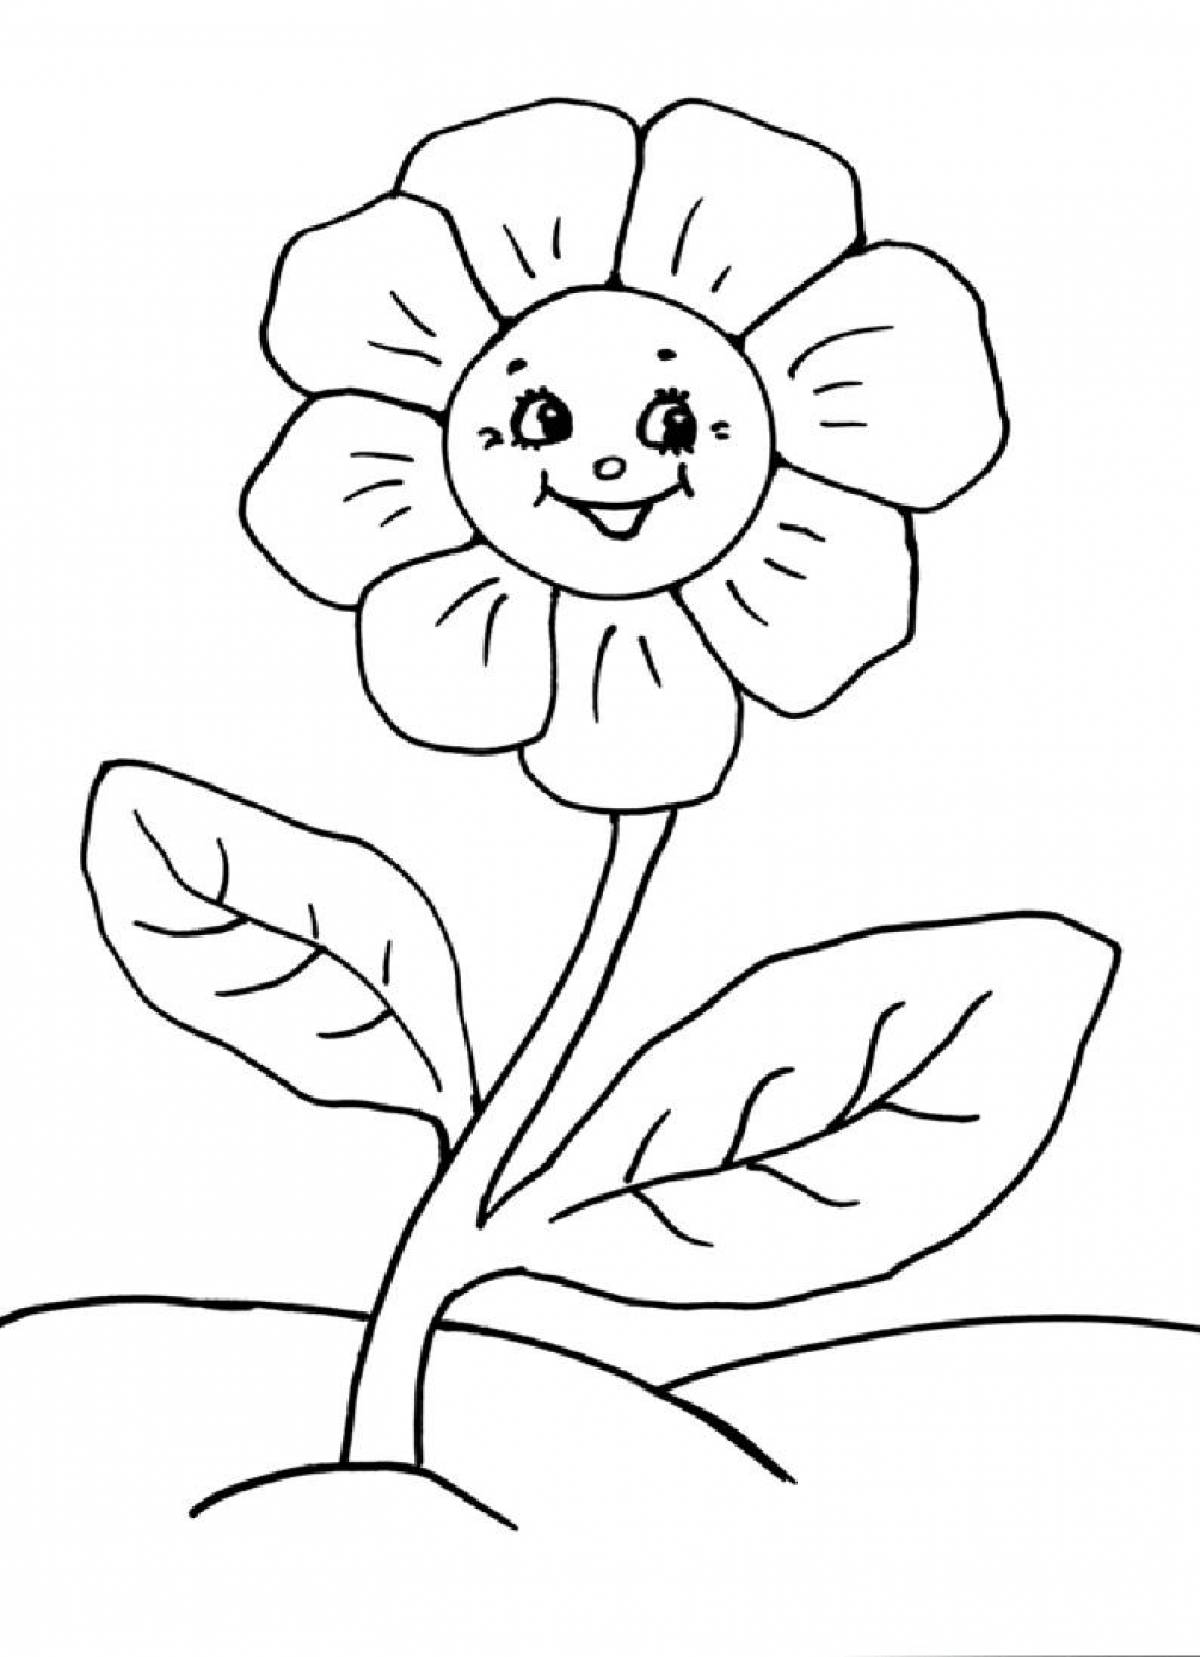 Nice flower coloring for kids